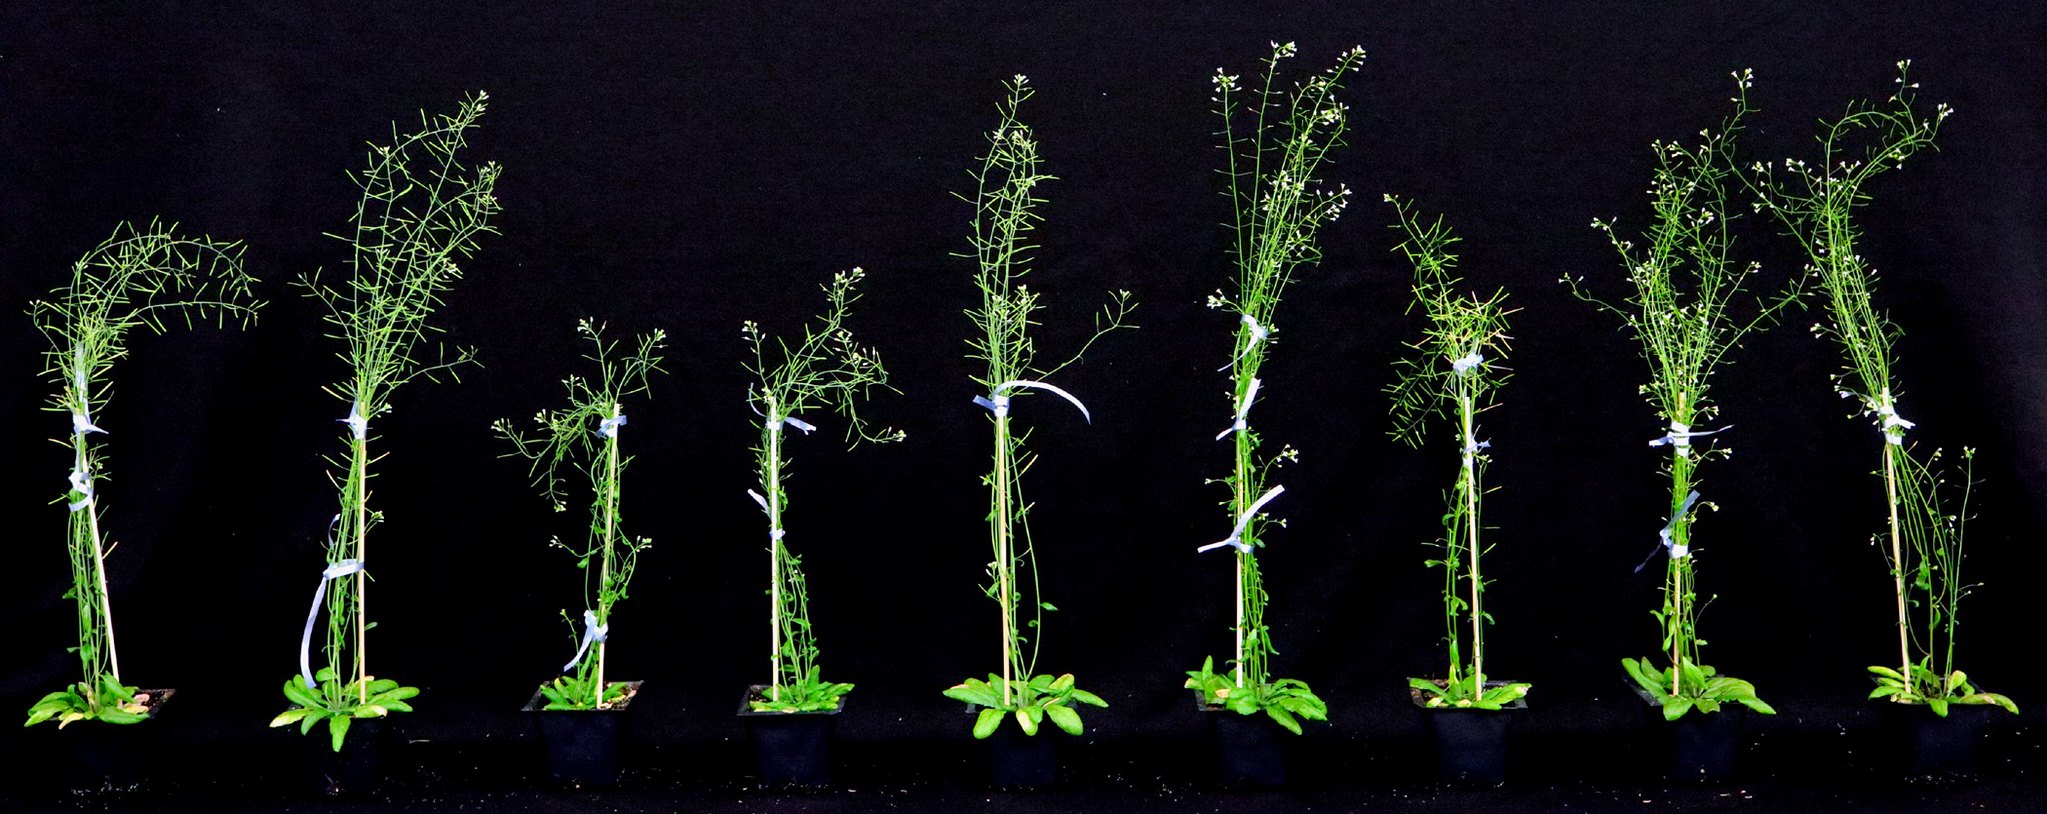 The team studied a variety of Arabidopsis phenotypes during the project. (Photo: Submitted)